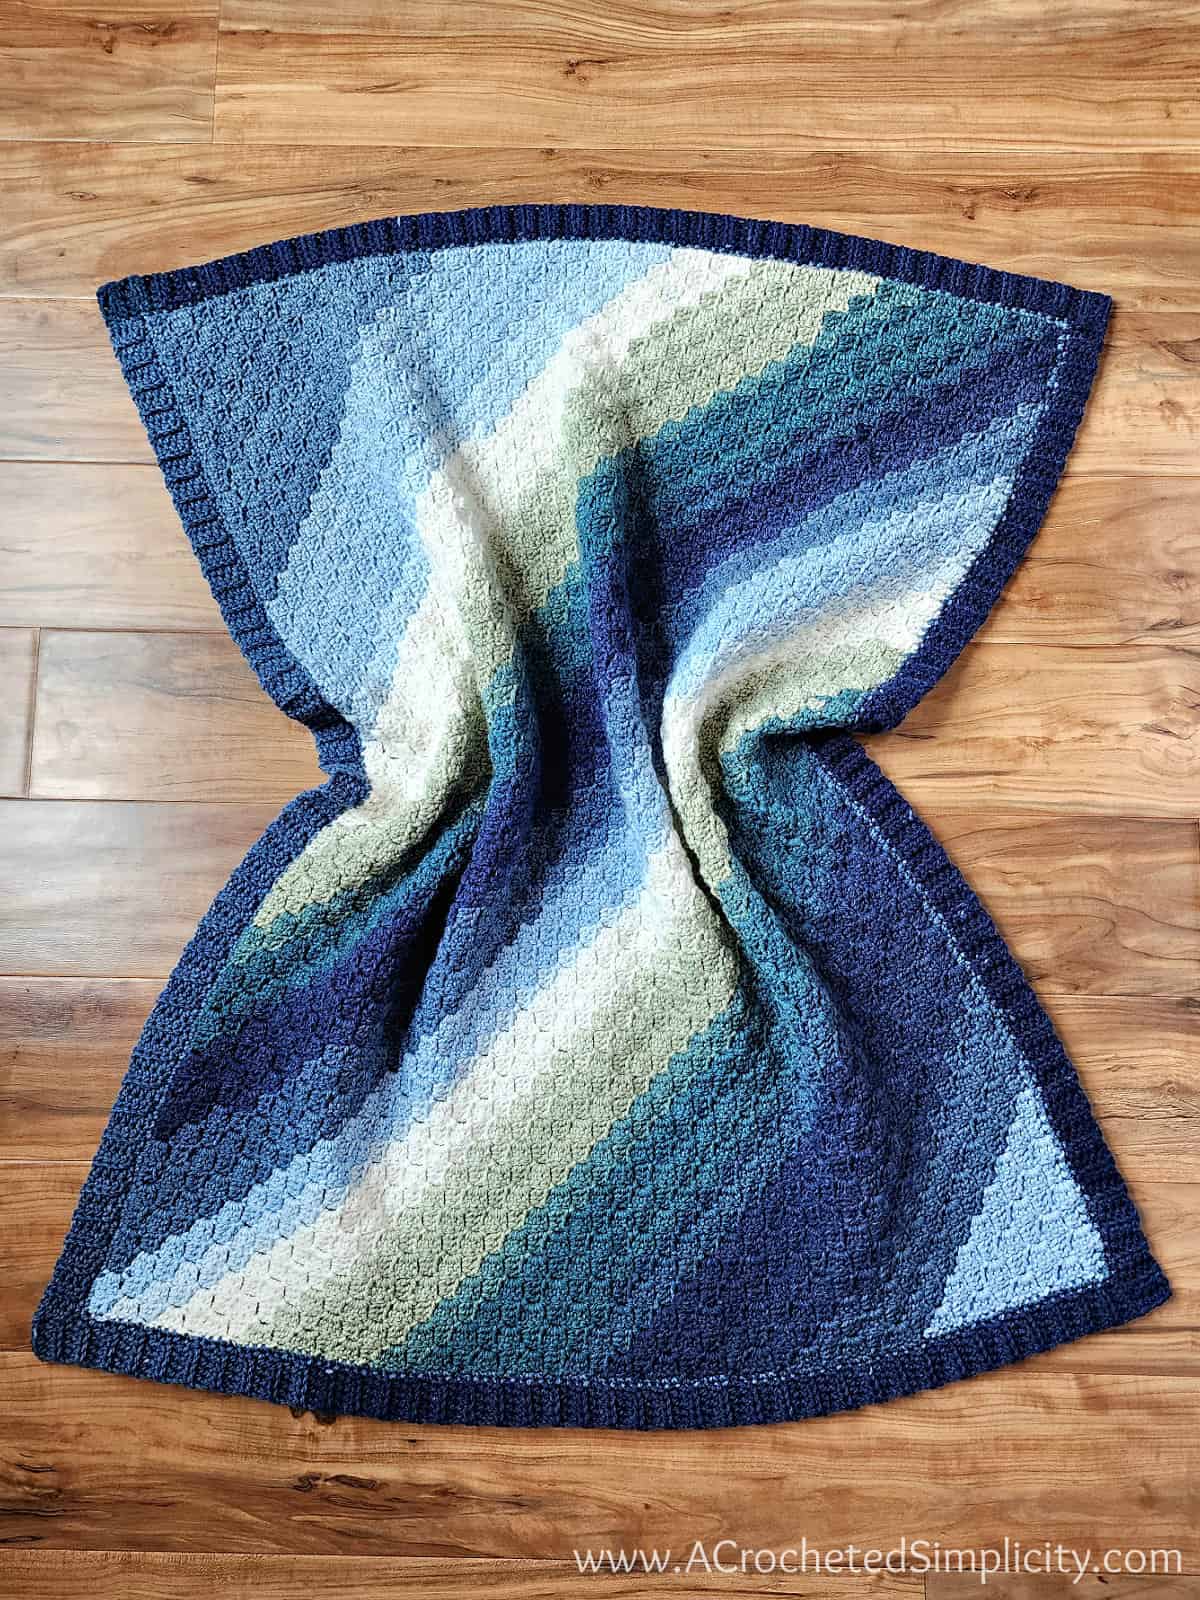 Crochet C2C baby blanket in blue ombre yarn laying on a wood floor.